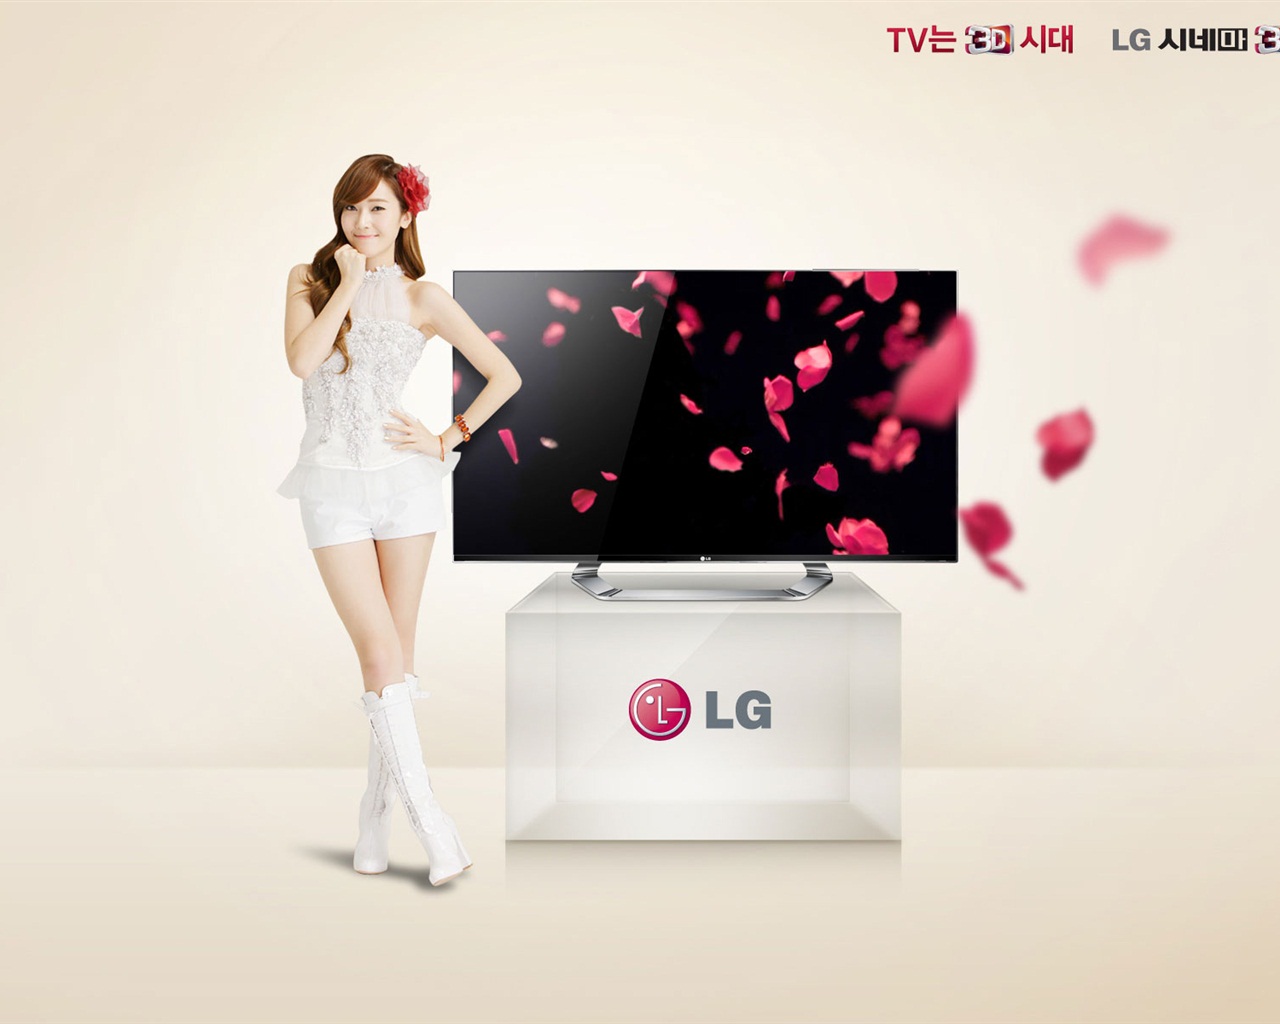 Girls Generation ACE and LG endorsements ads HD wallpapers #18 - 1280x1024